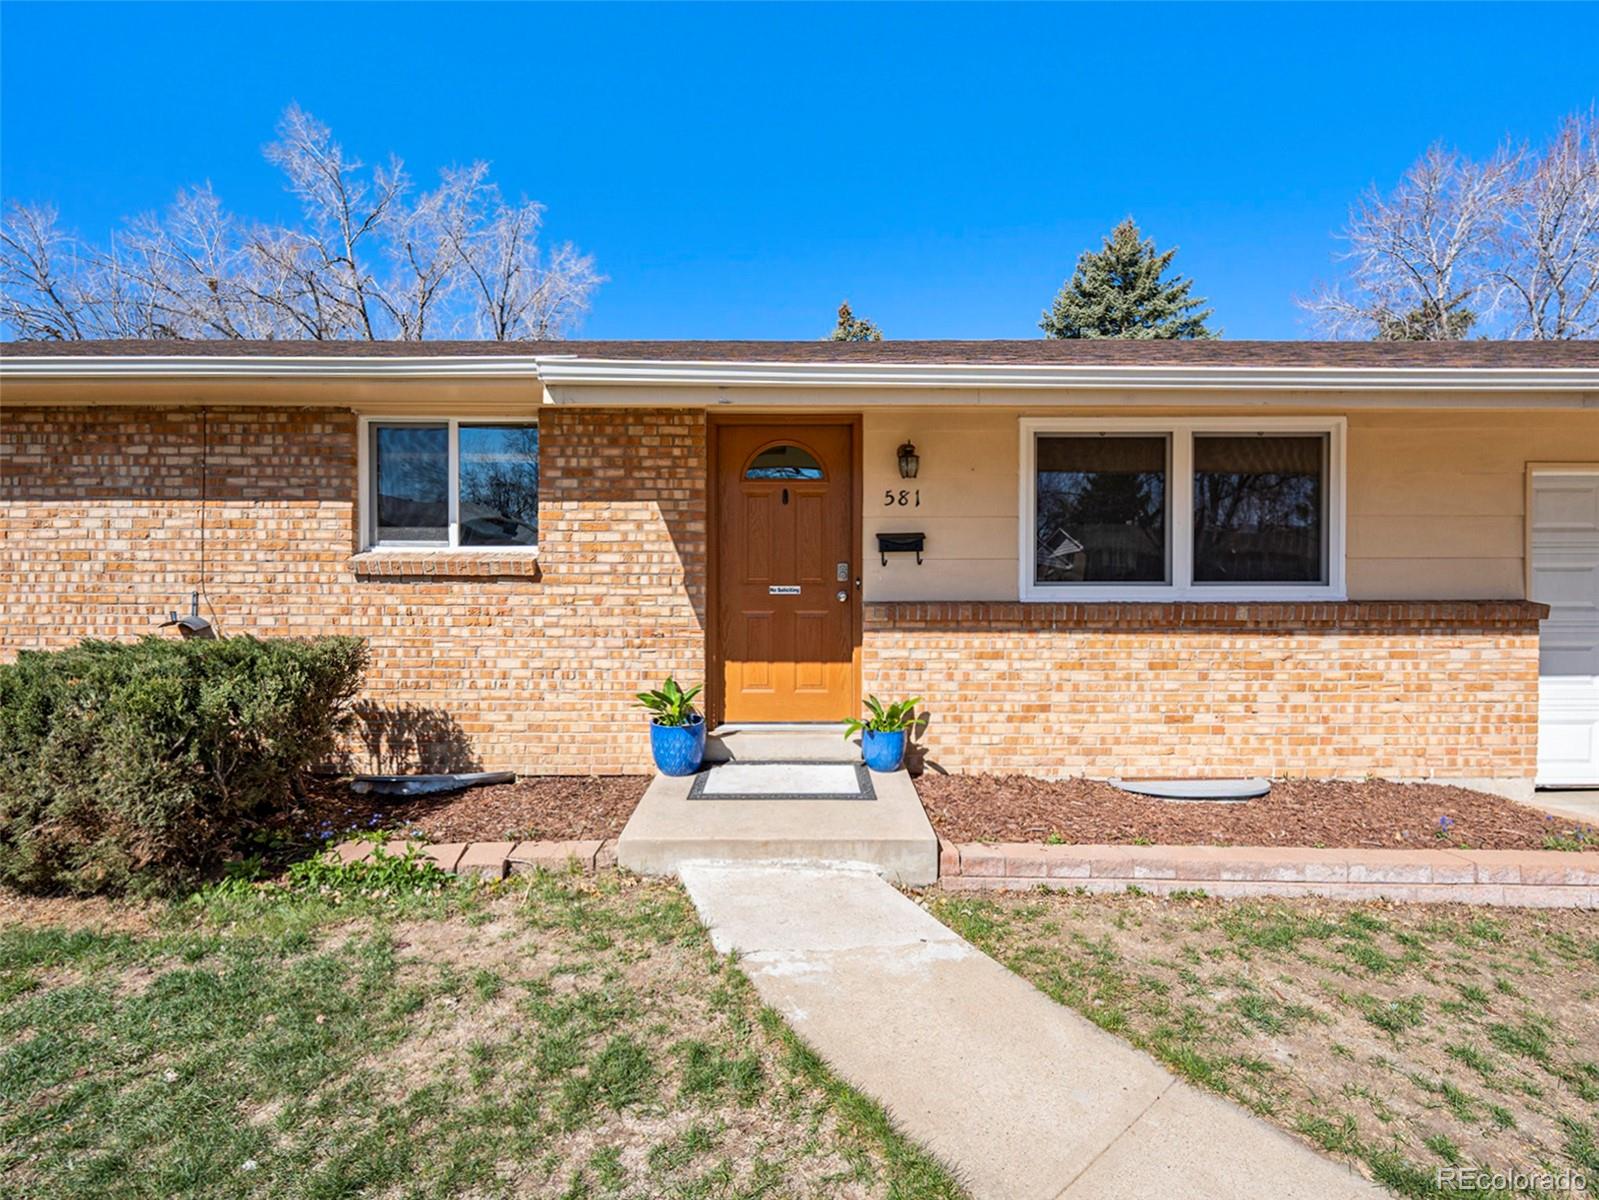 Report Image for 581 S Newland Street,Lakewood, Colorado